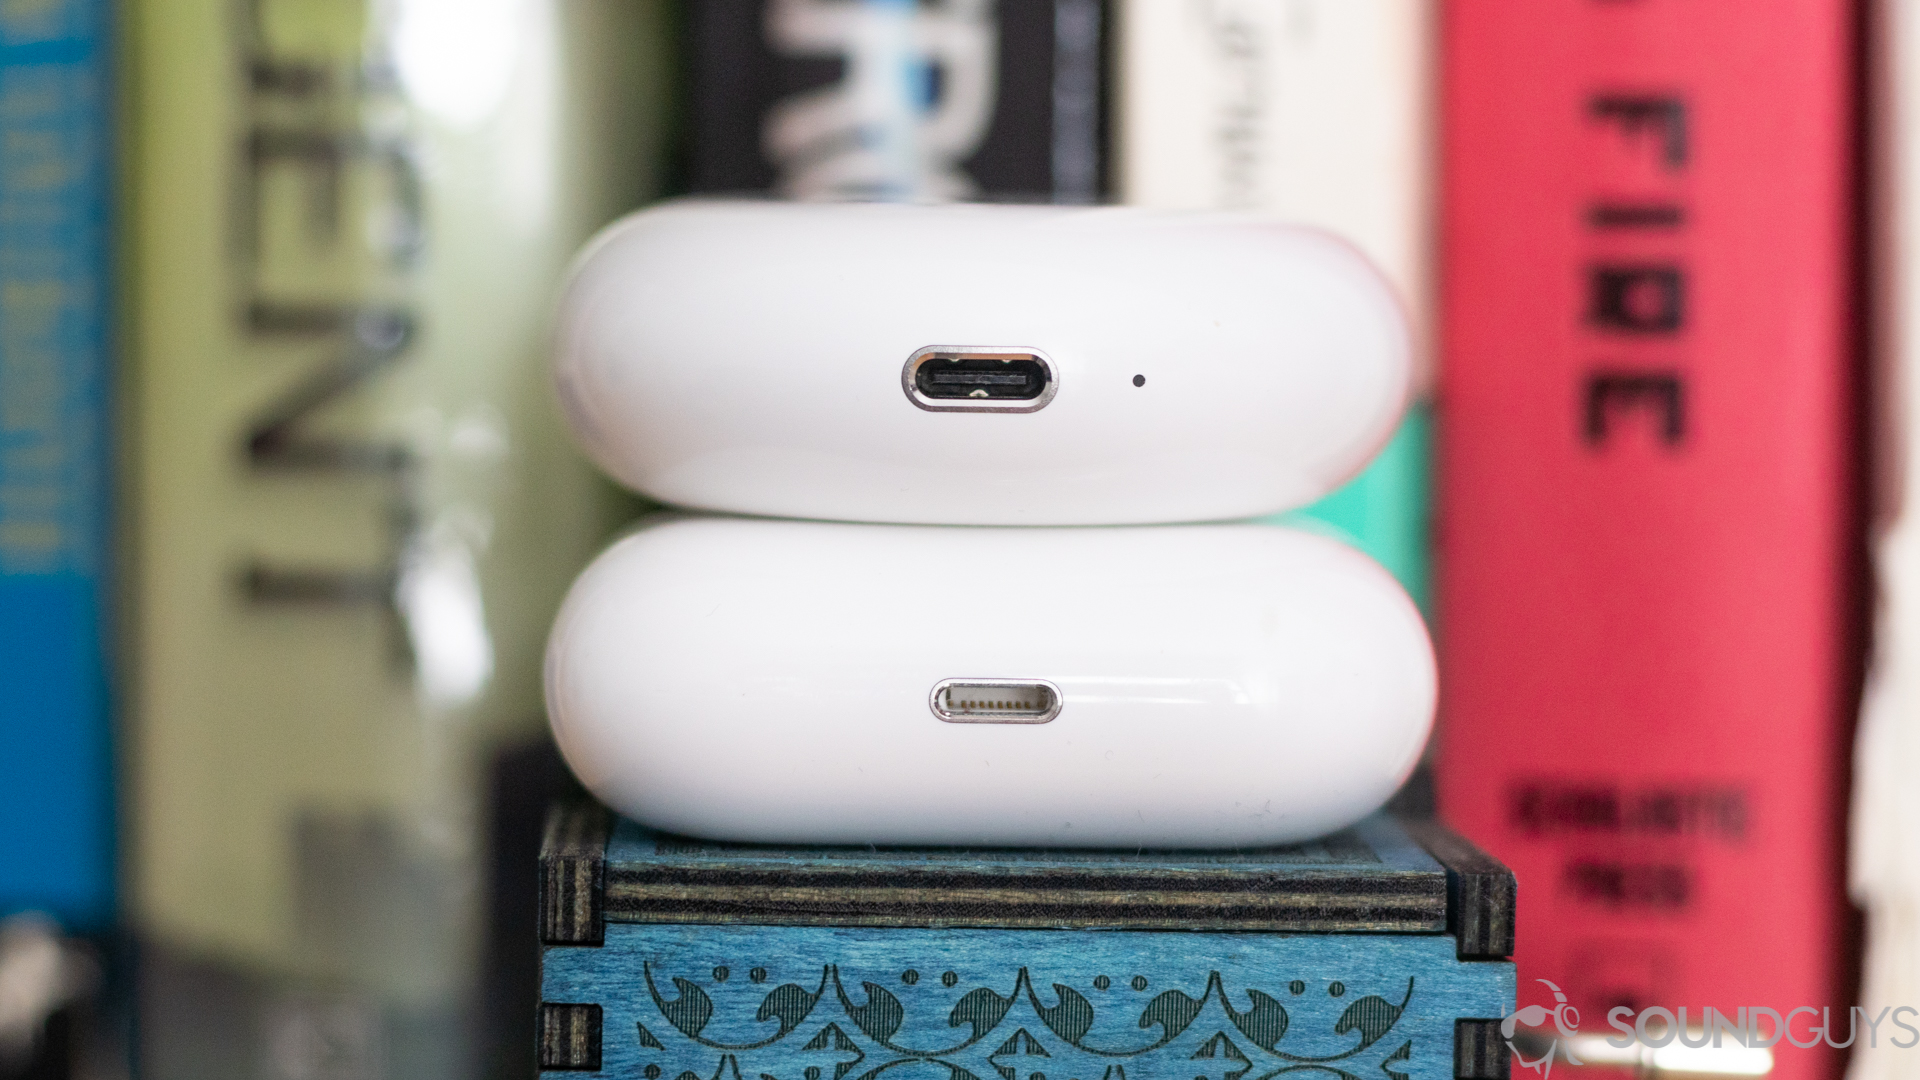 Hectares Unnecessary June Apple AirPods Pro vs Huawei Freebuds 3: The pro or the clone?